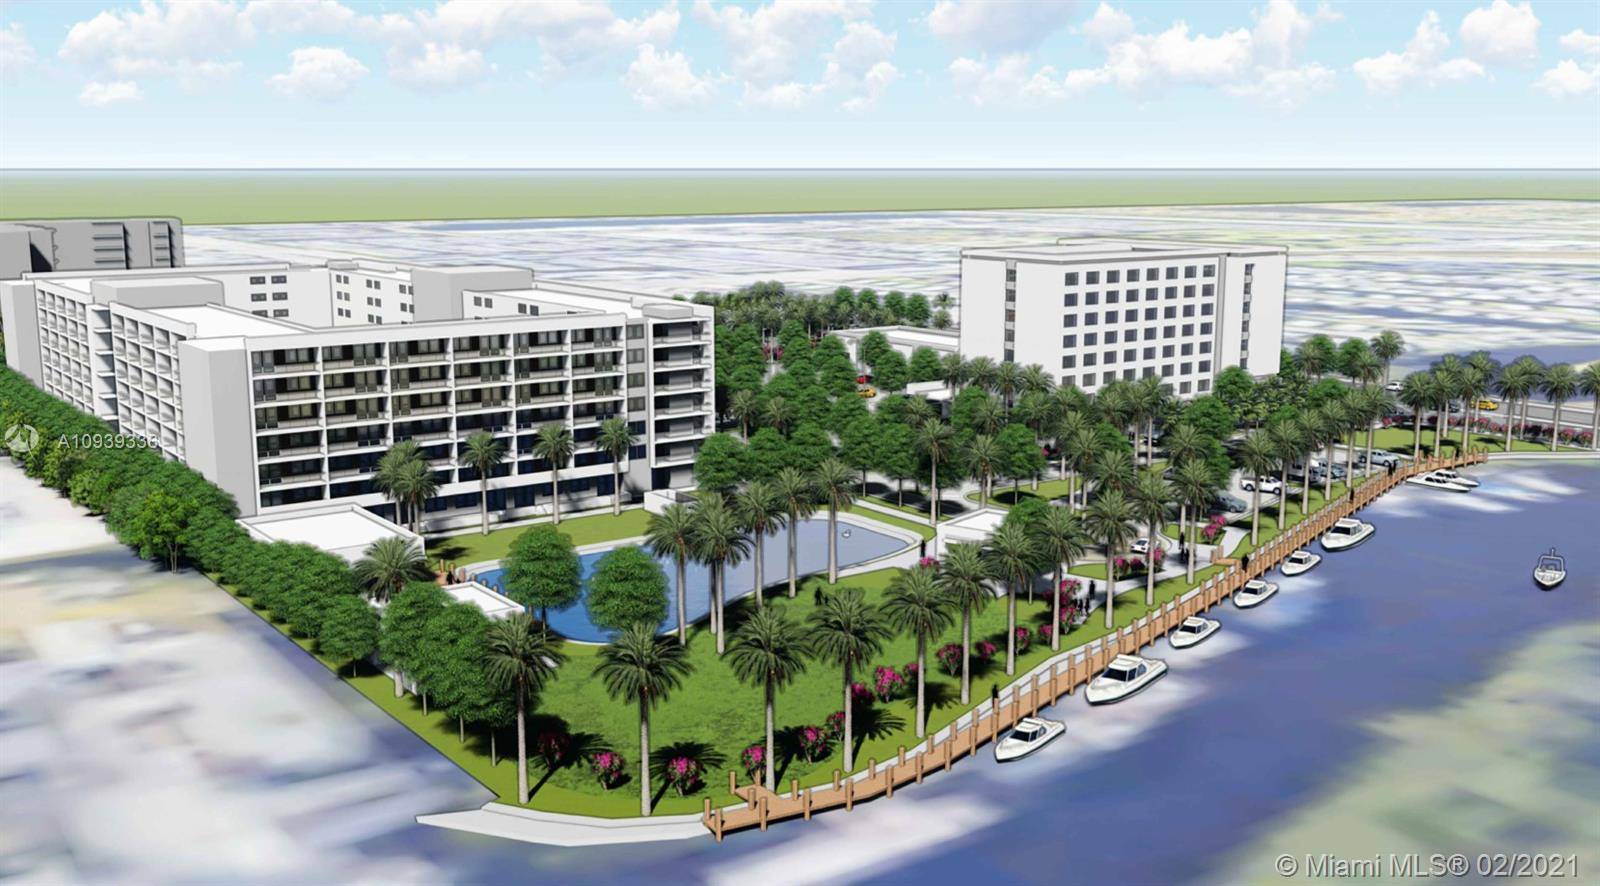 Mixed use development currently in the final stages of site plan approval 3 4 miles from THE SEMINOLE HARD ROCK CASINO GUITAR HOTEL consisting of 4 folios including a Marina.